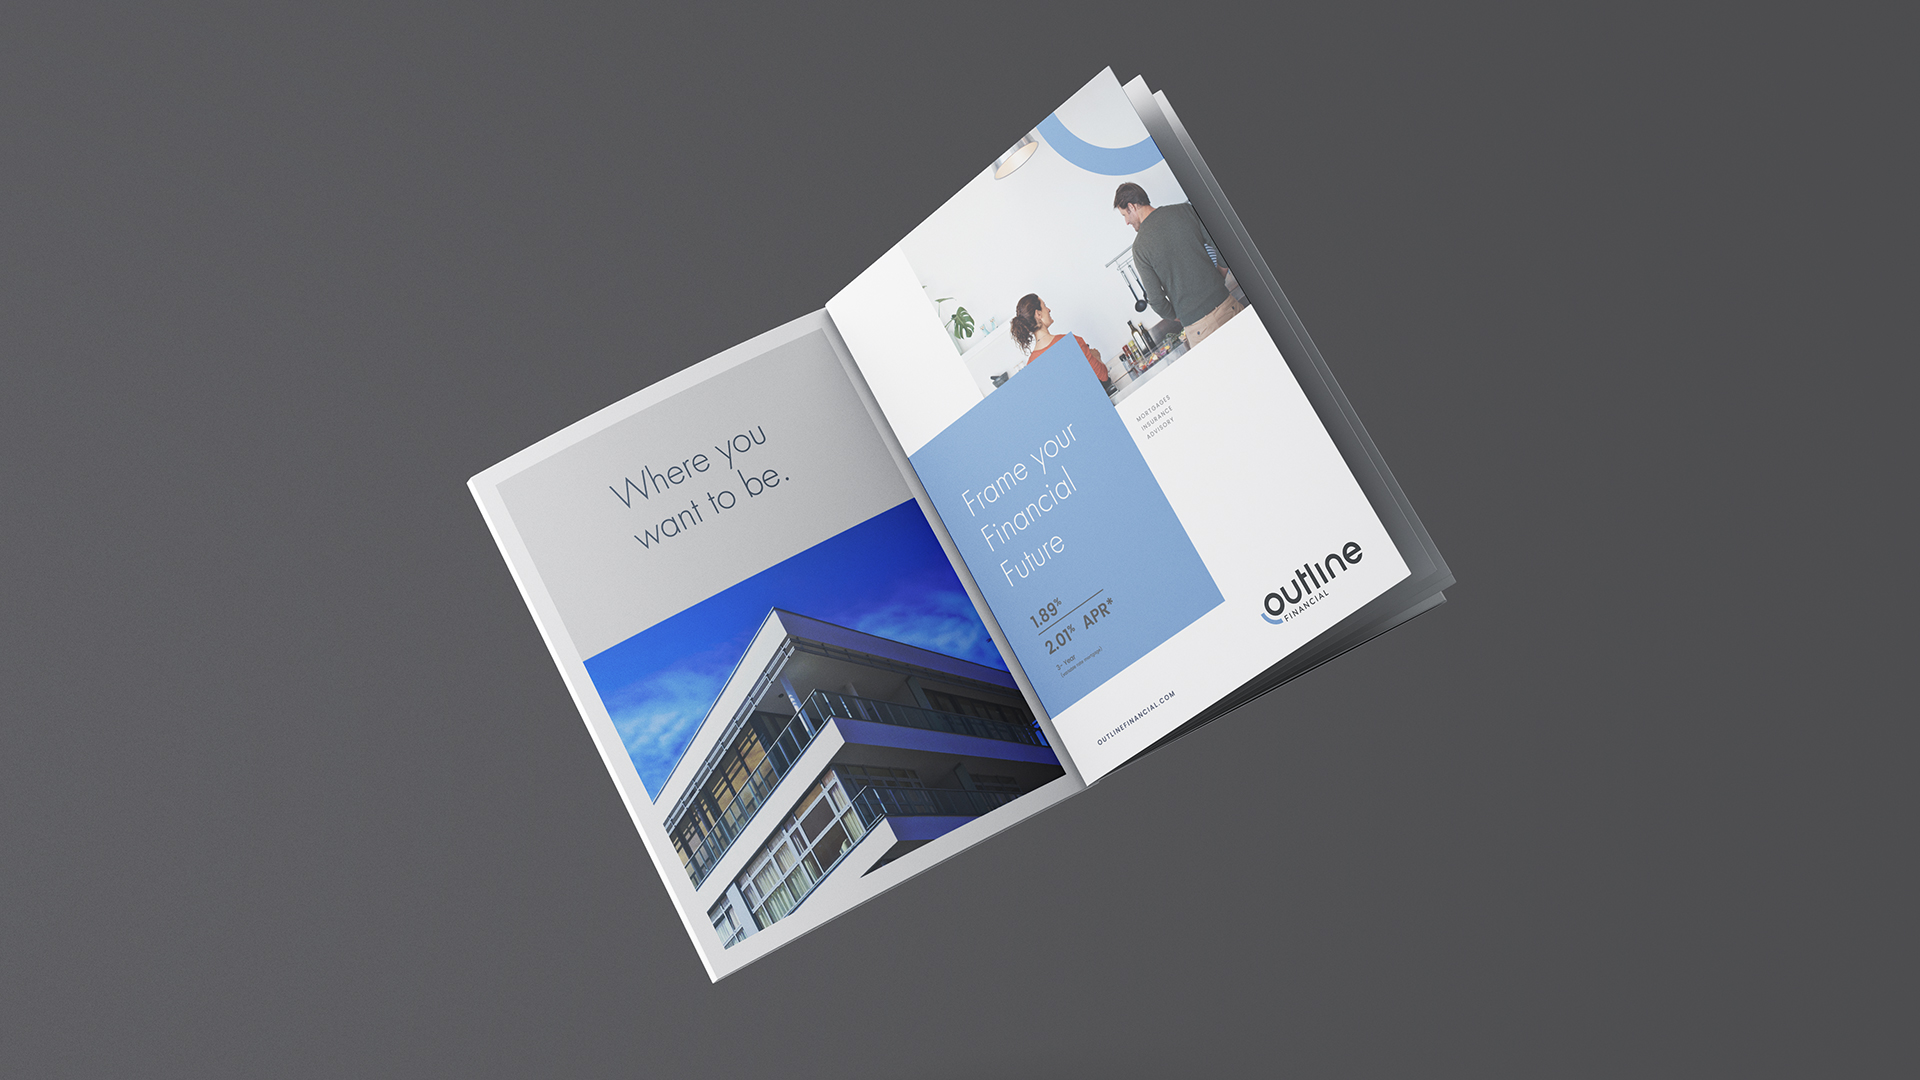 Outline Financial Brand Case Study